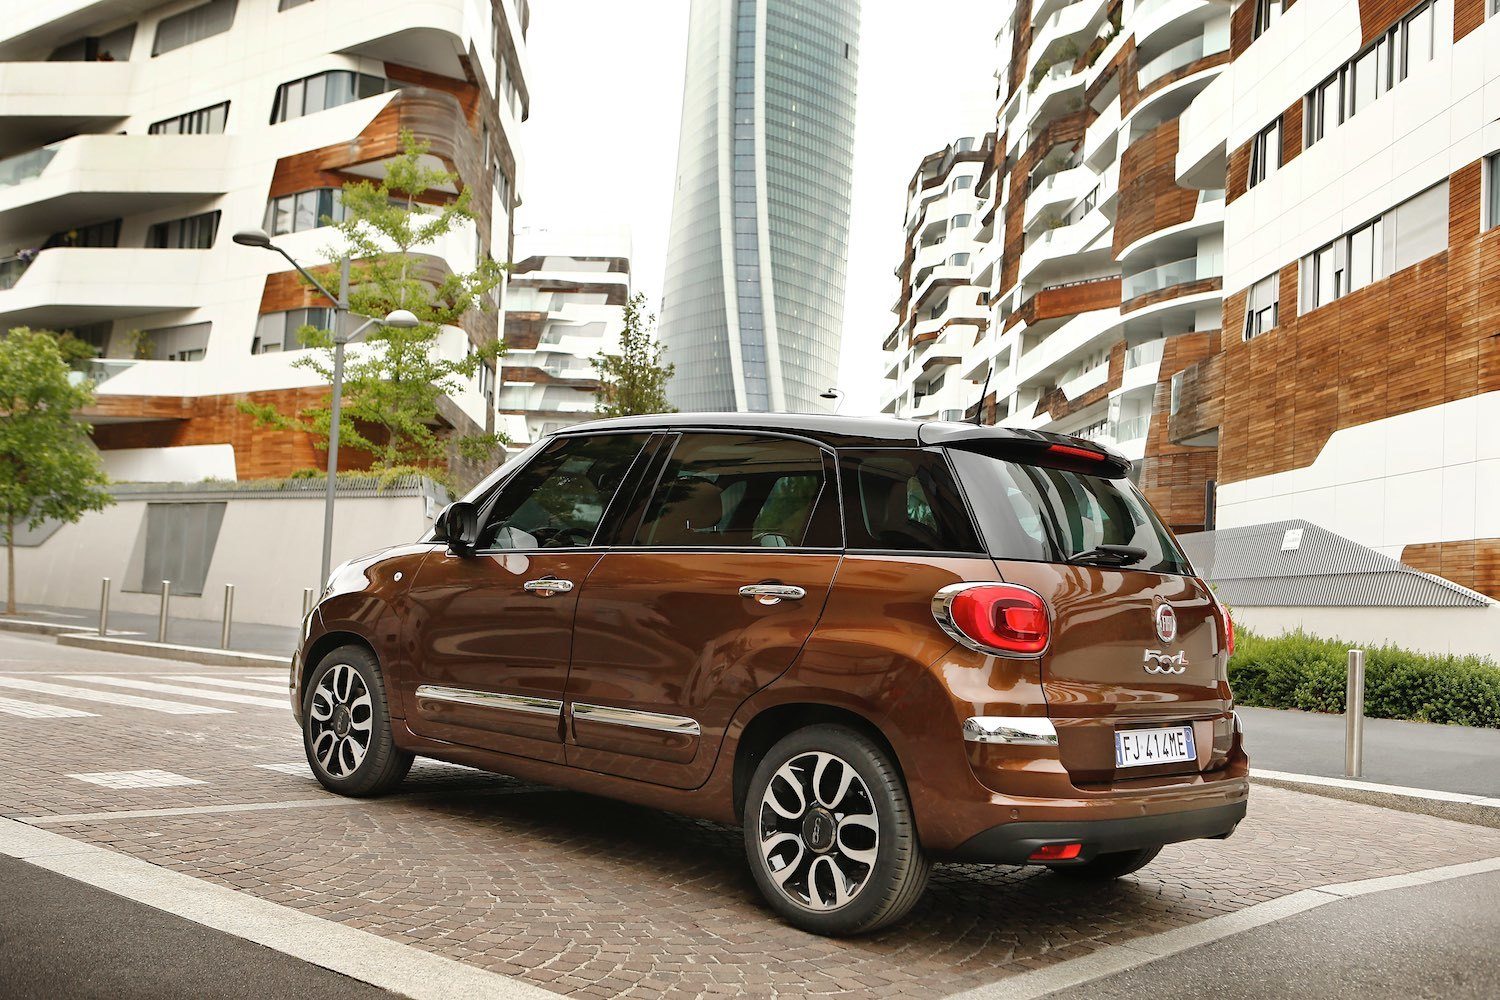 Tim Barnes-Clay reviews the New Fiat 500L from the first drive in Italy 18